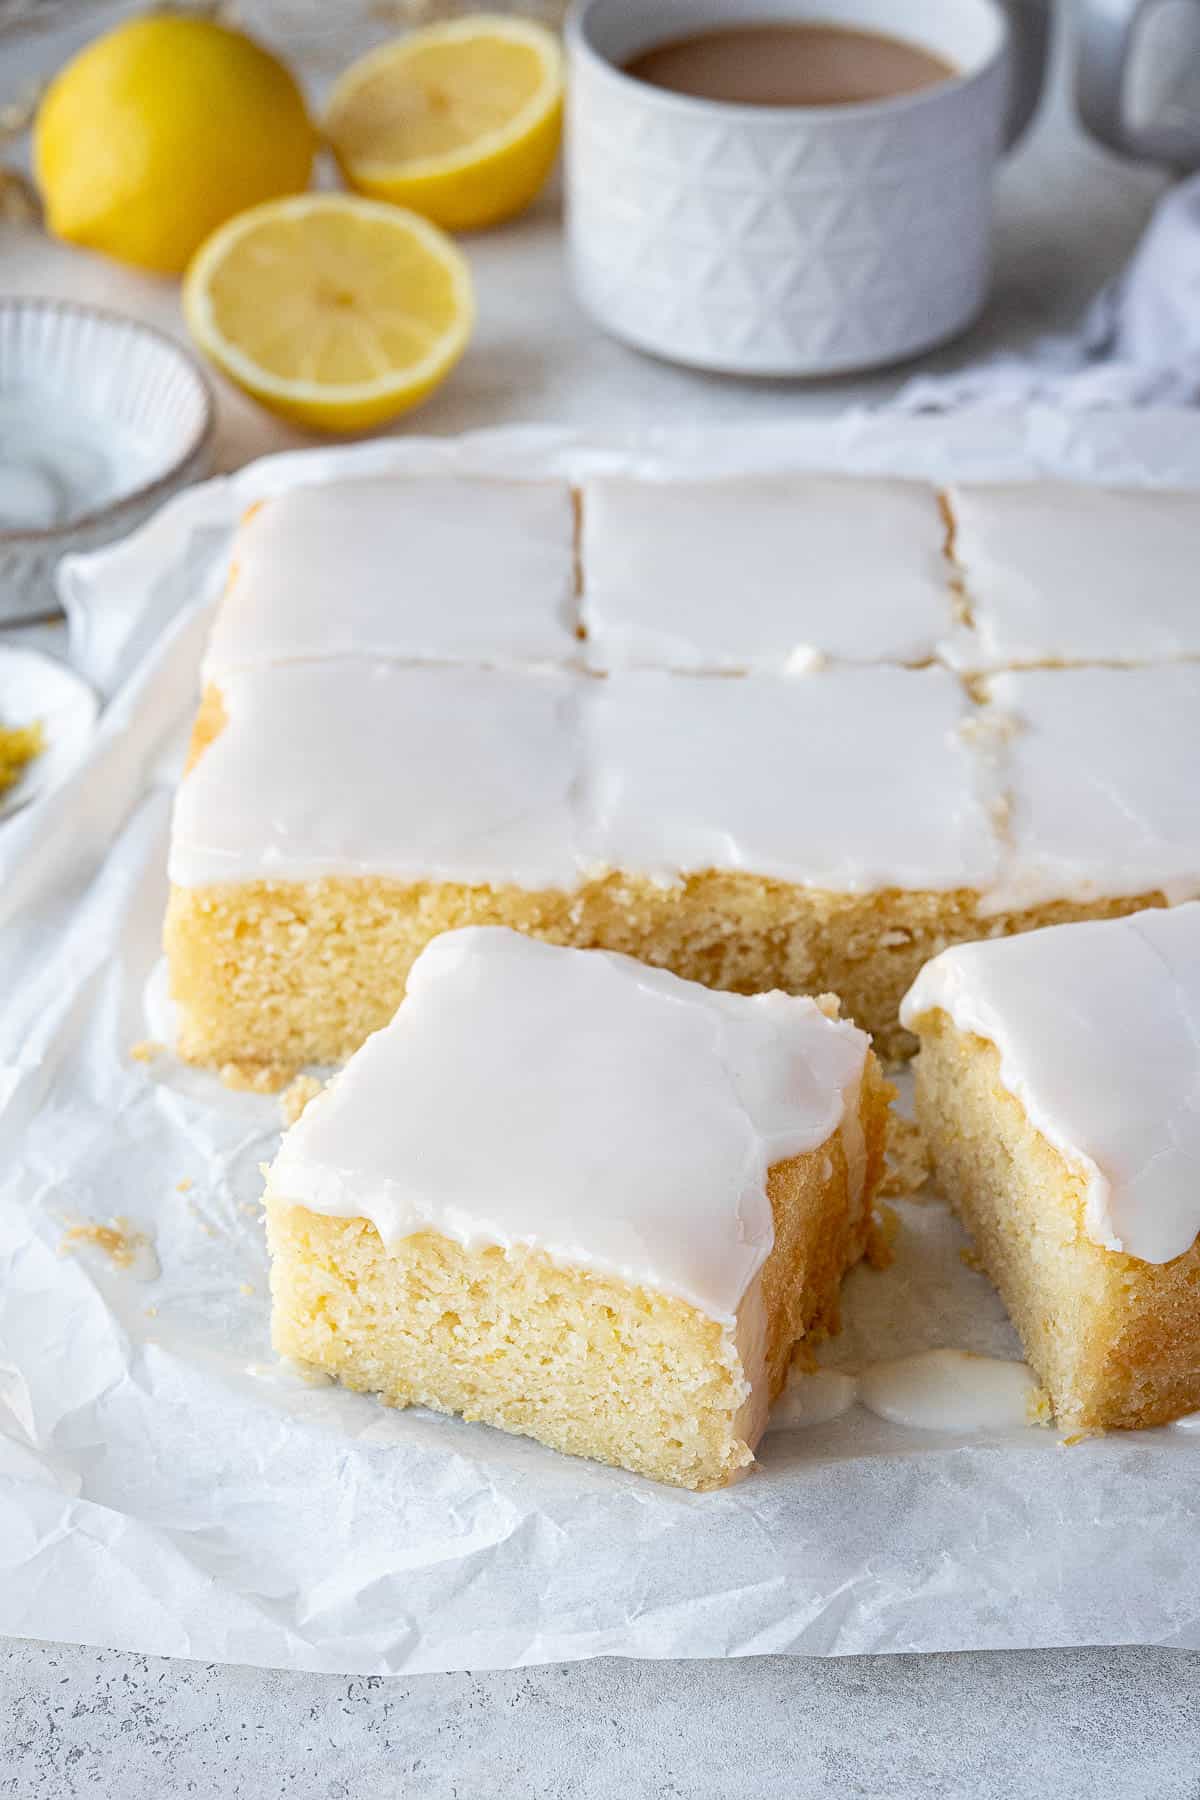 Lemon drizzle cake with cups of tea and fresh lemons in the background.